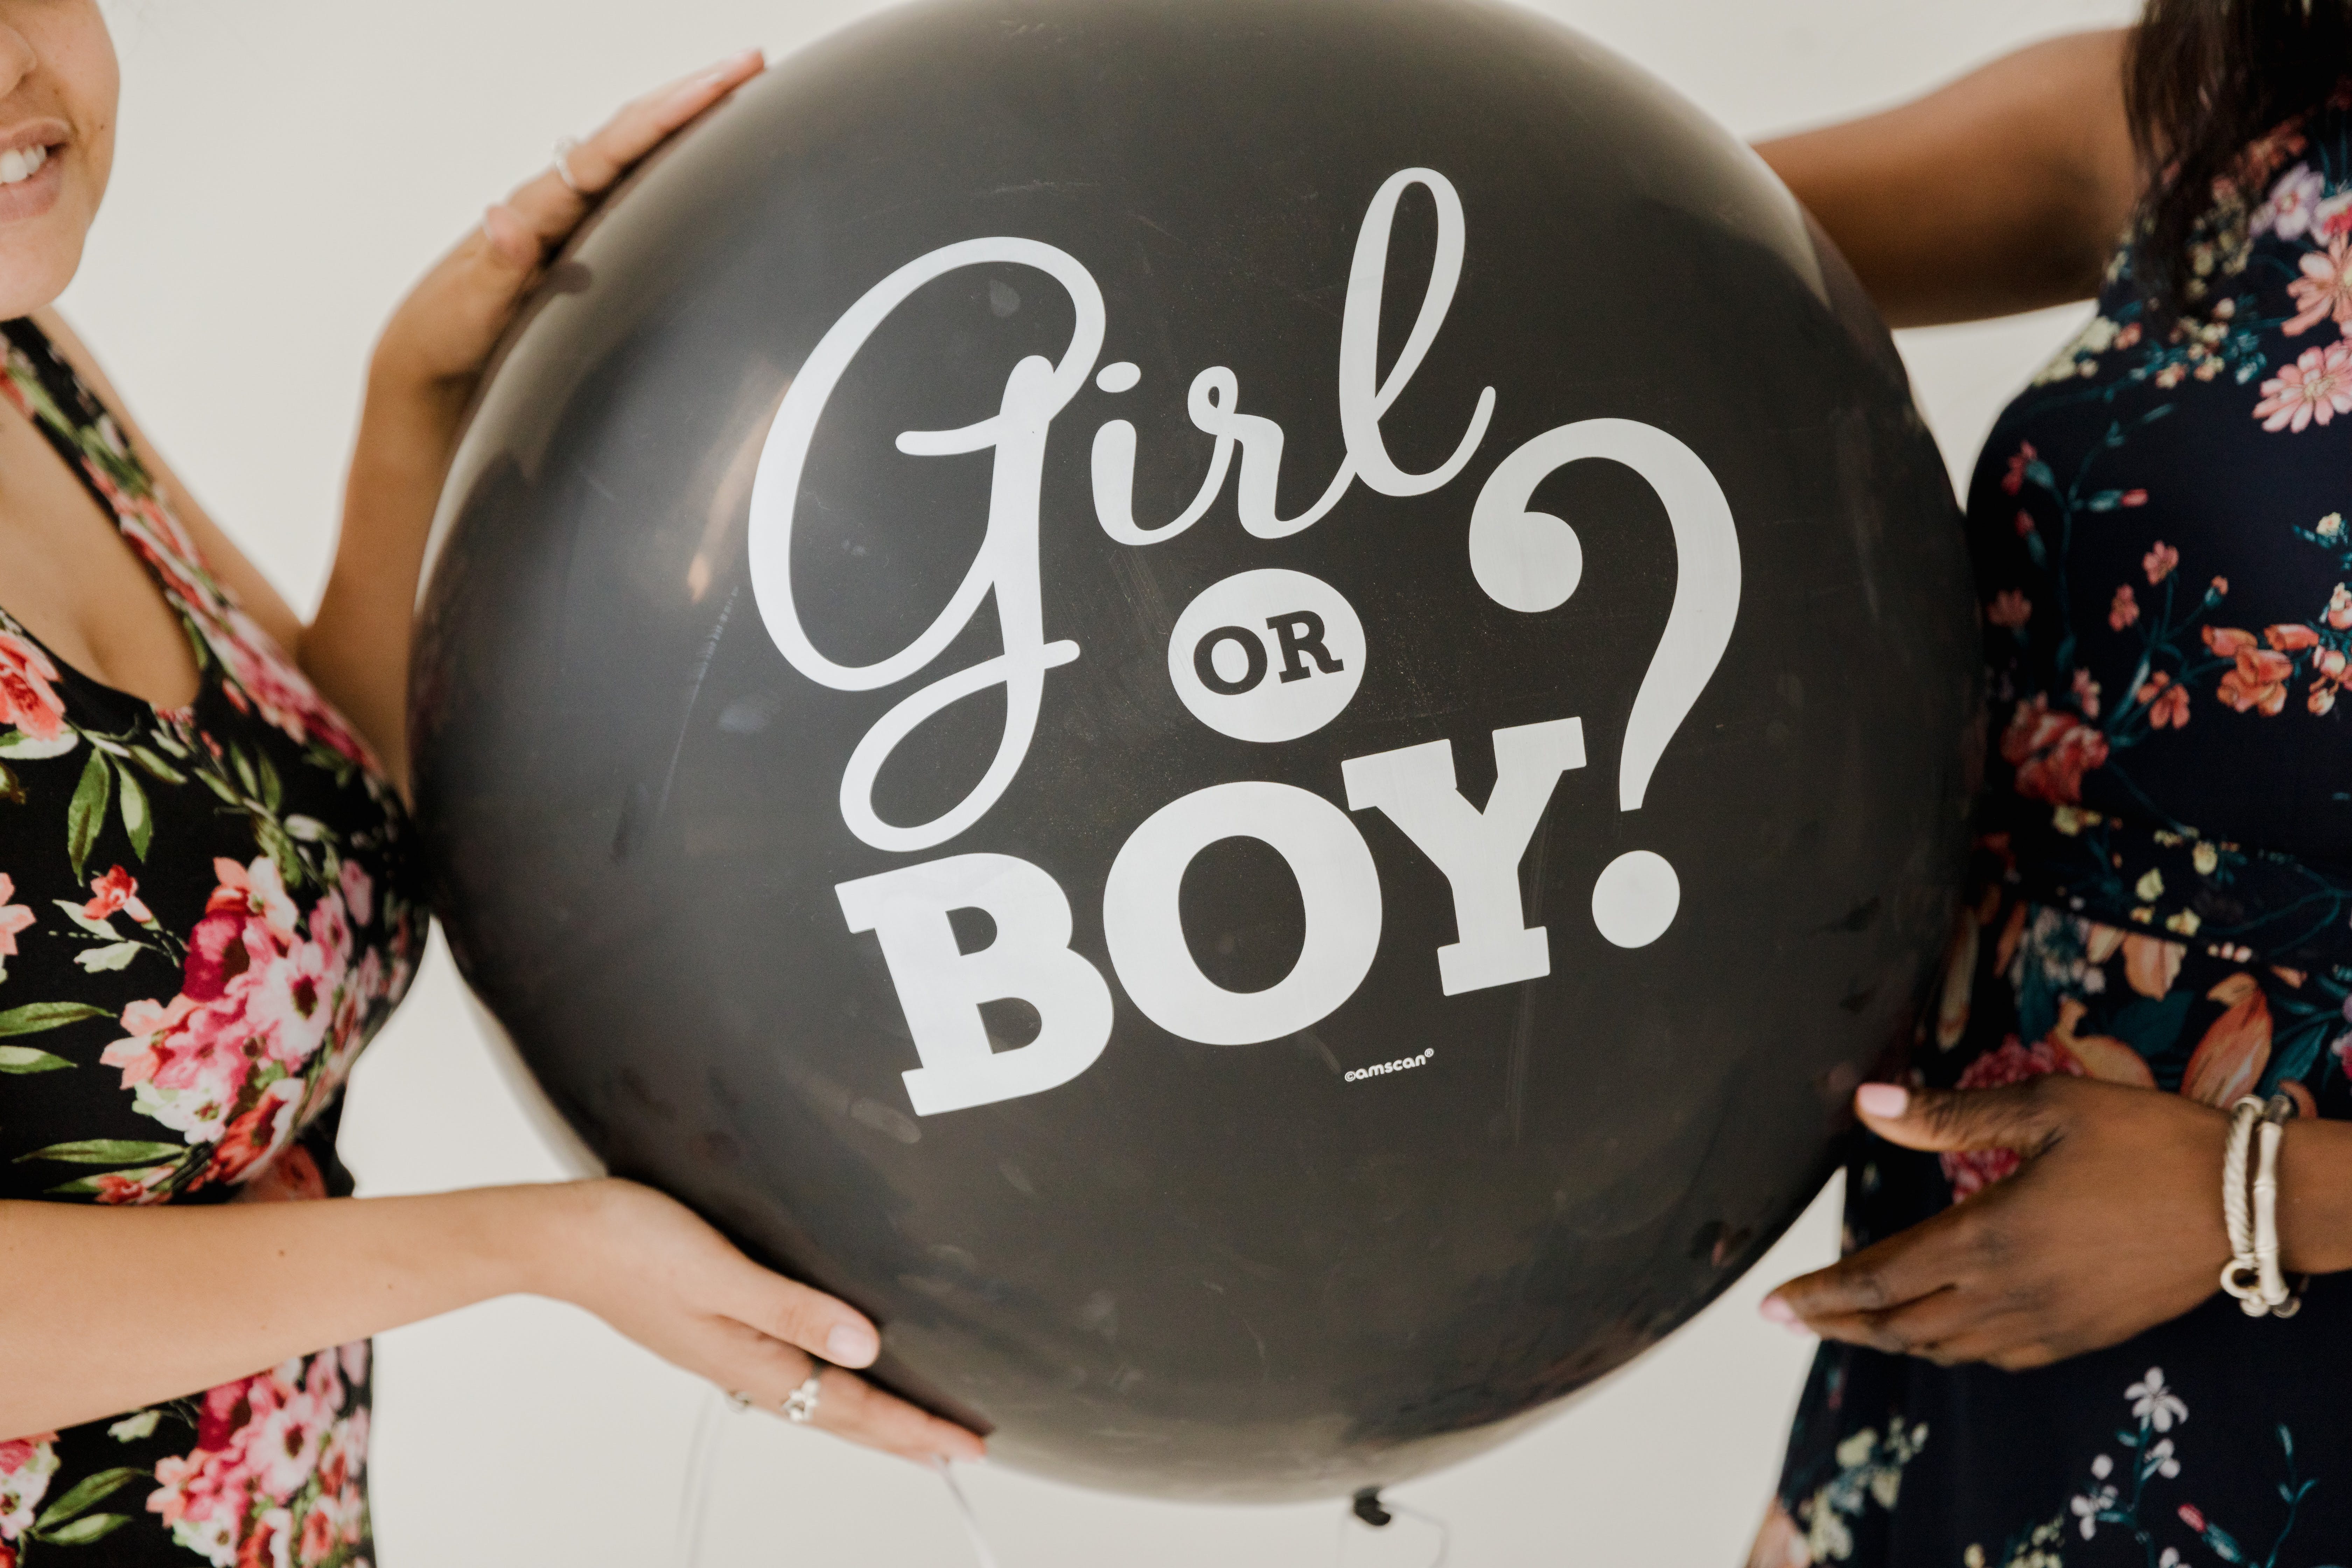 Two women holding a gender reveal balloon | Source: Pexels